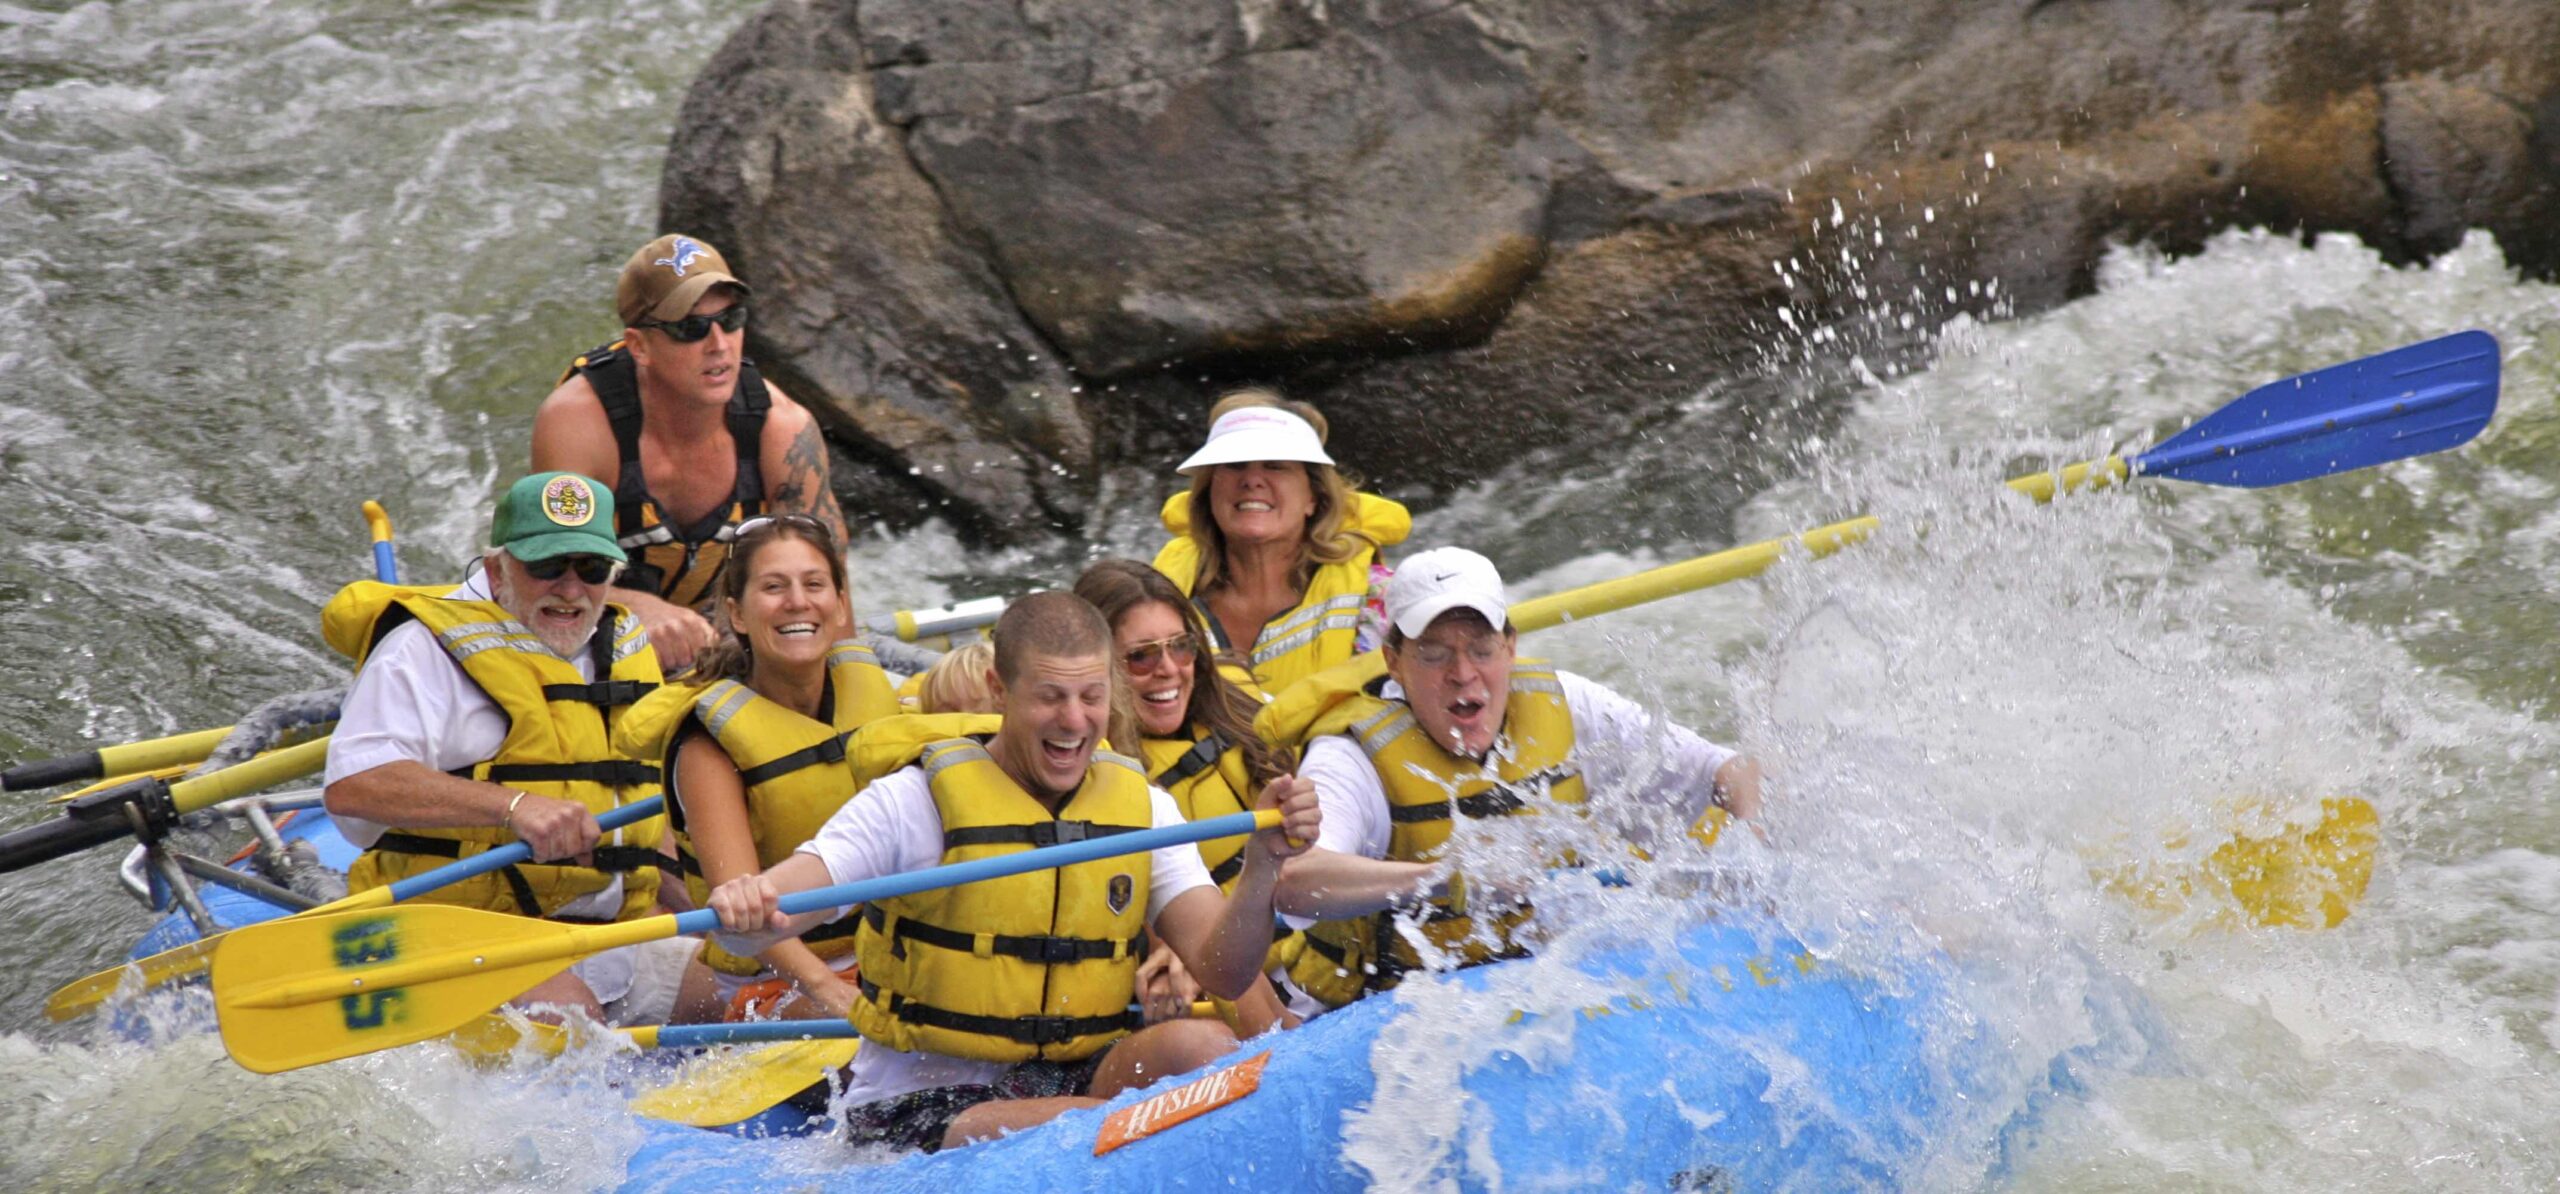 In this lively photo, a boat of rafters and their guide navigate the thrilling Shoshone Rapids on the Colorado River. Splashes of water surround them as they paddle, wearing bright smiles that reflect the sheer enjoyment of the moment.